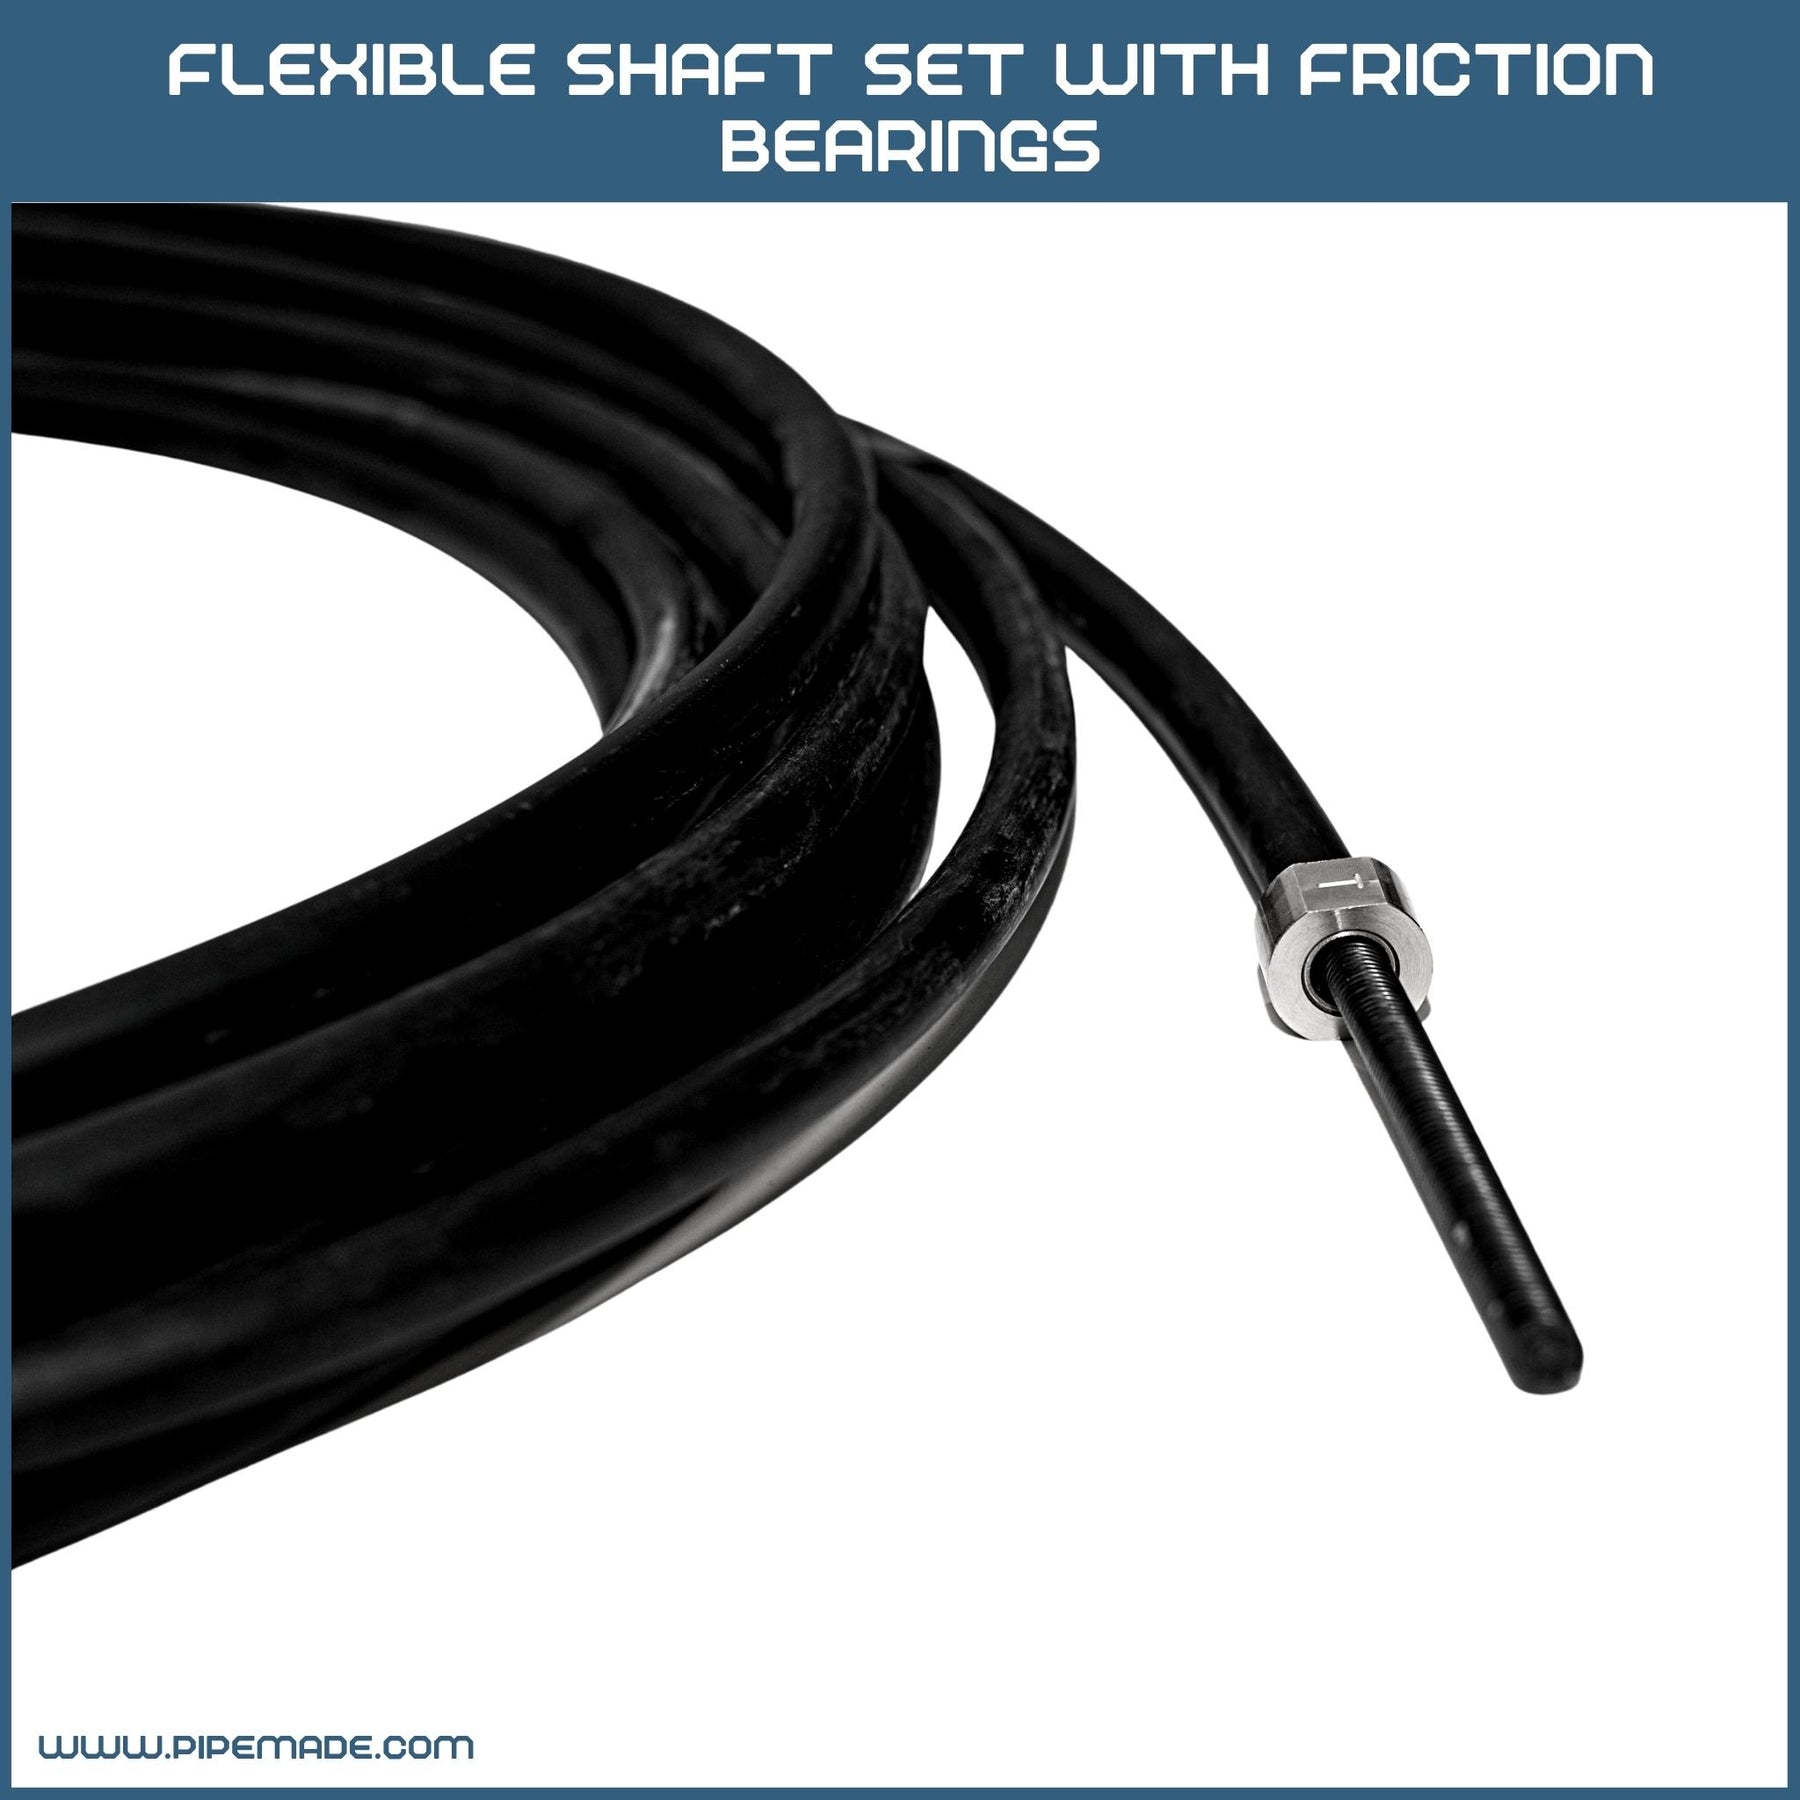 Flexible Shaft Set With Friction Bearings